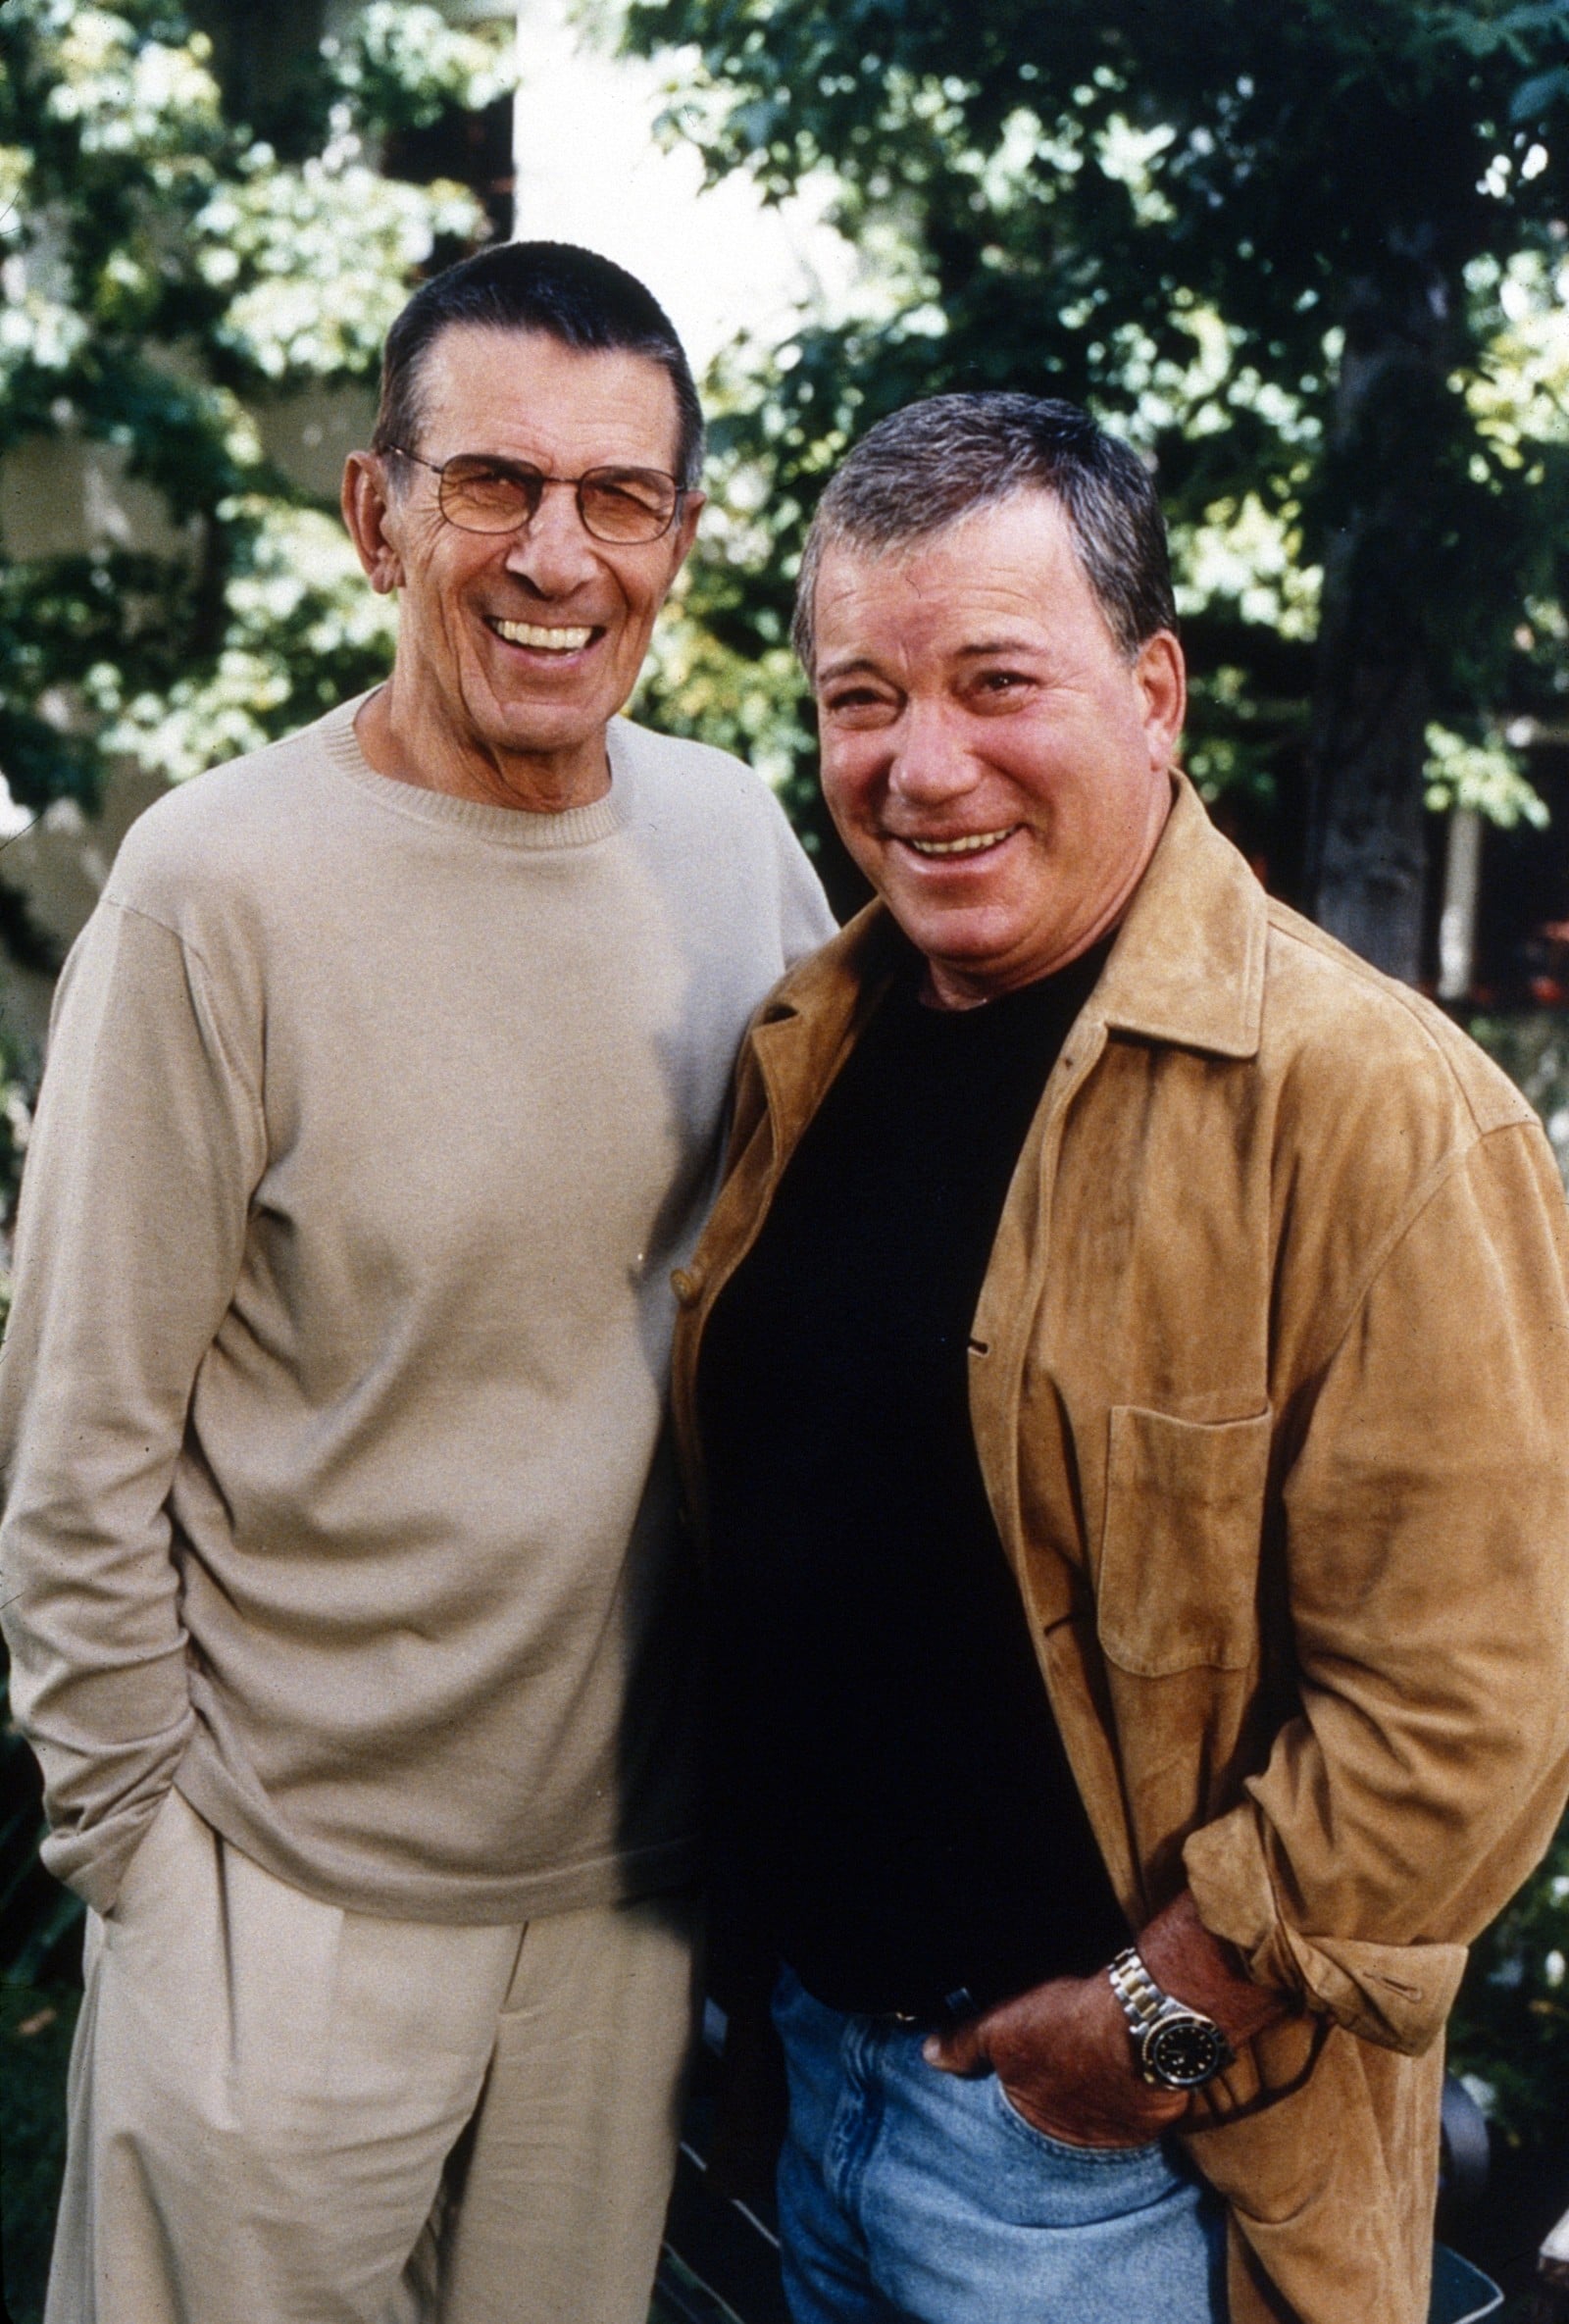 At Years Old William Shatner Still Doesn T Know Why He And Leonard Nimoy Drifted Apart